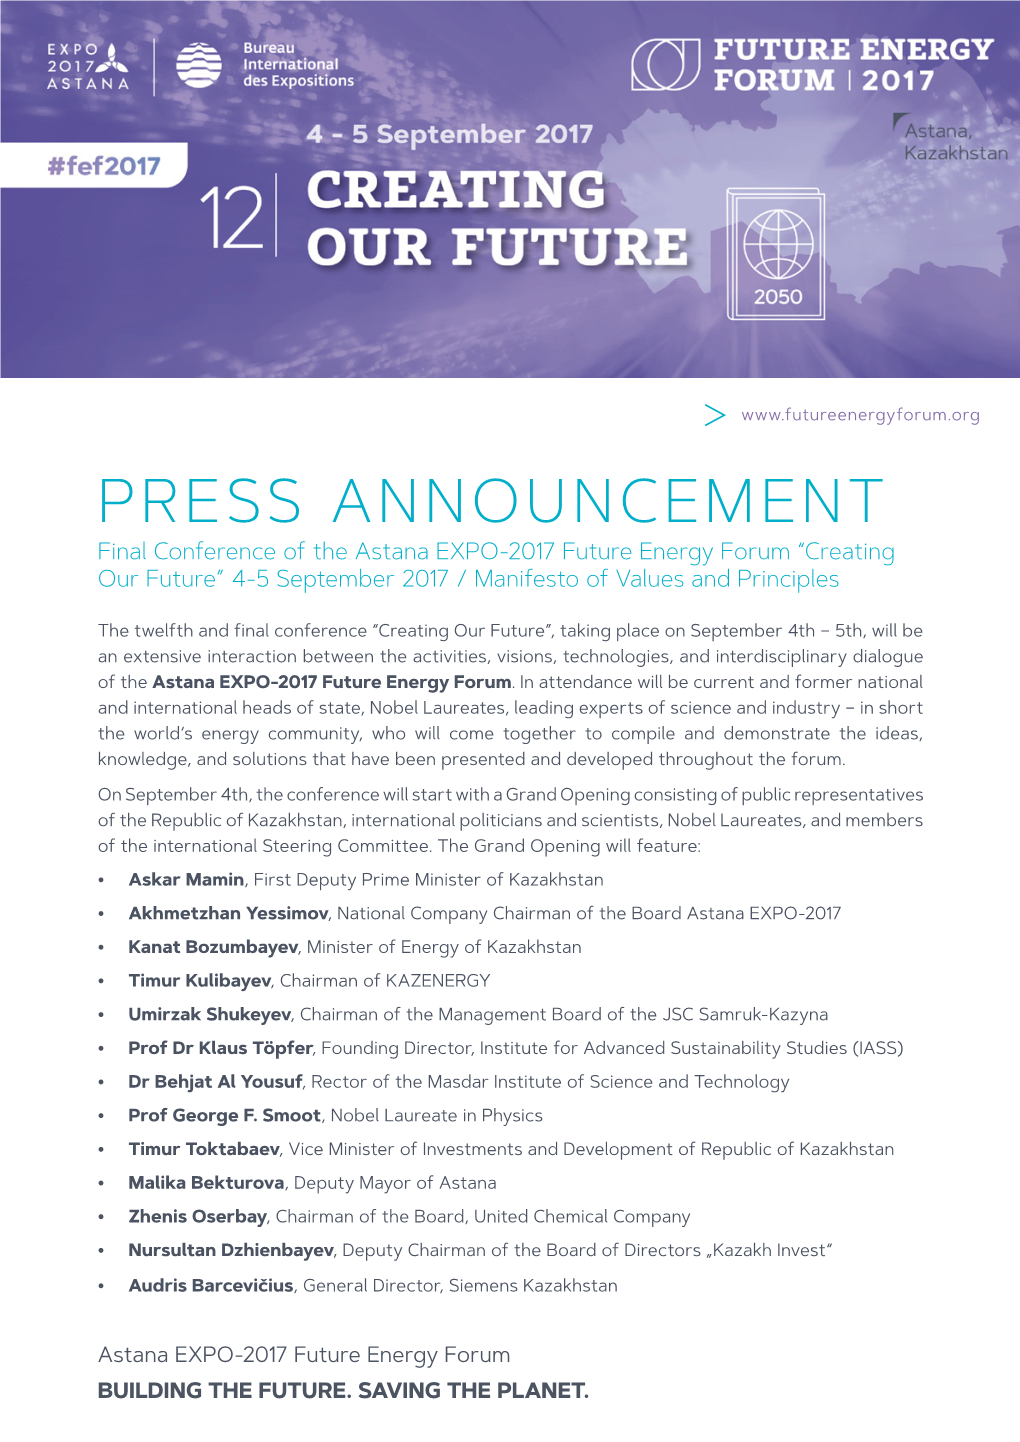 Press Announcement Final Conference of the Astana EXPO-2017 Future Energy Forum “Creating Our Future” 4-5 September 2017 / Manifesto of Values and Principles